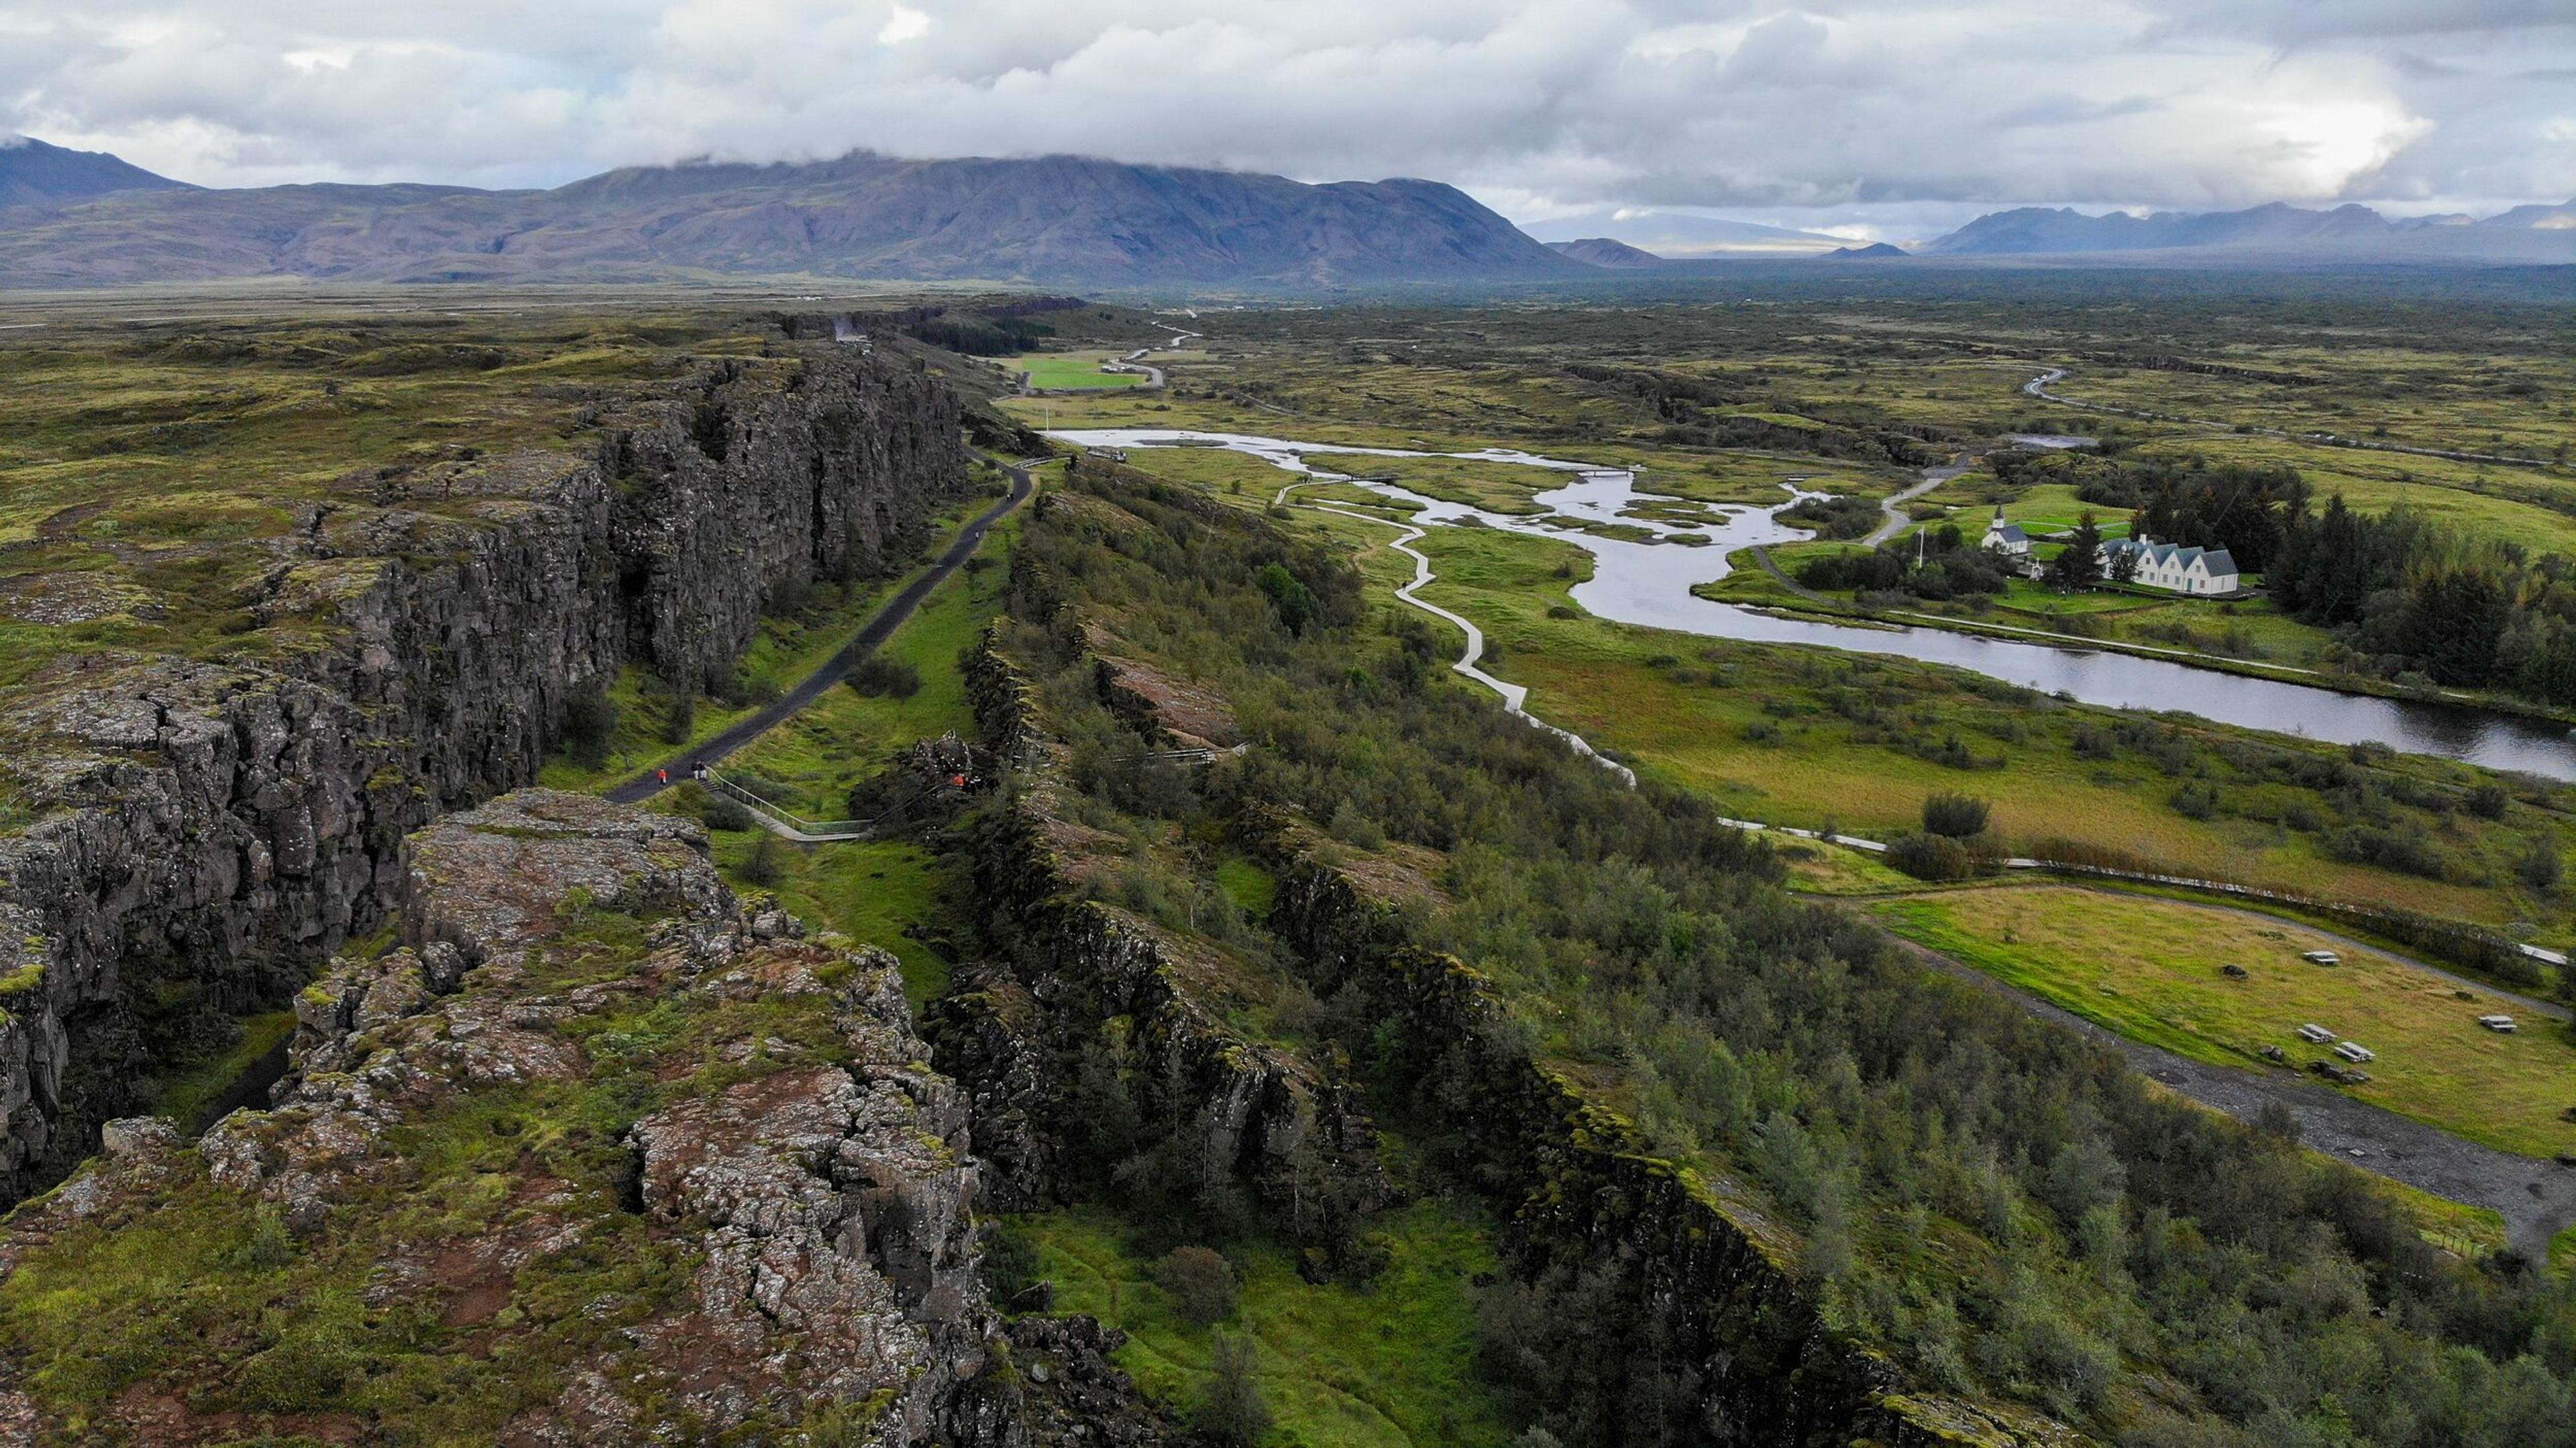 An aerial view over Þingvellir National park in the golden circle, Iceland.